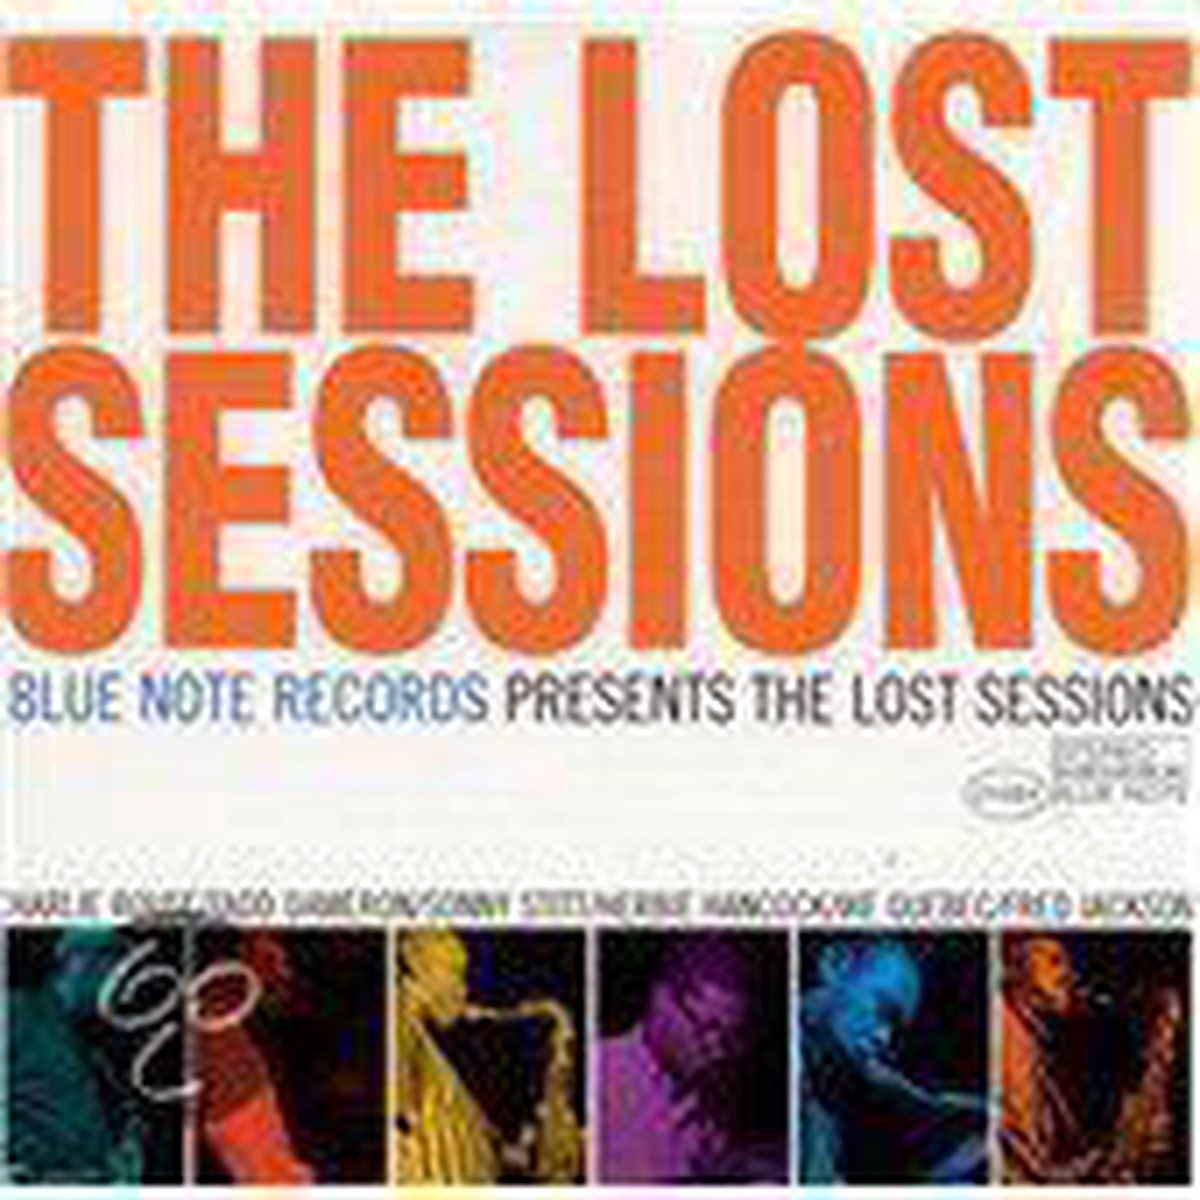 The Lost Sessions - various artists